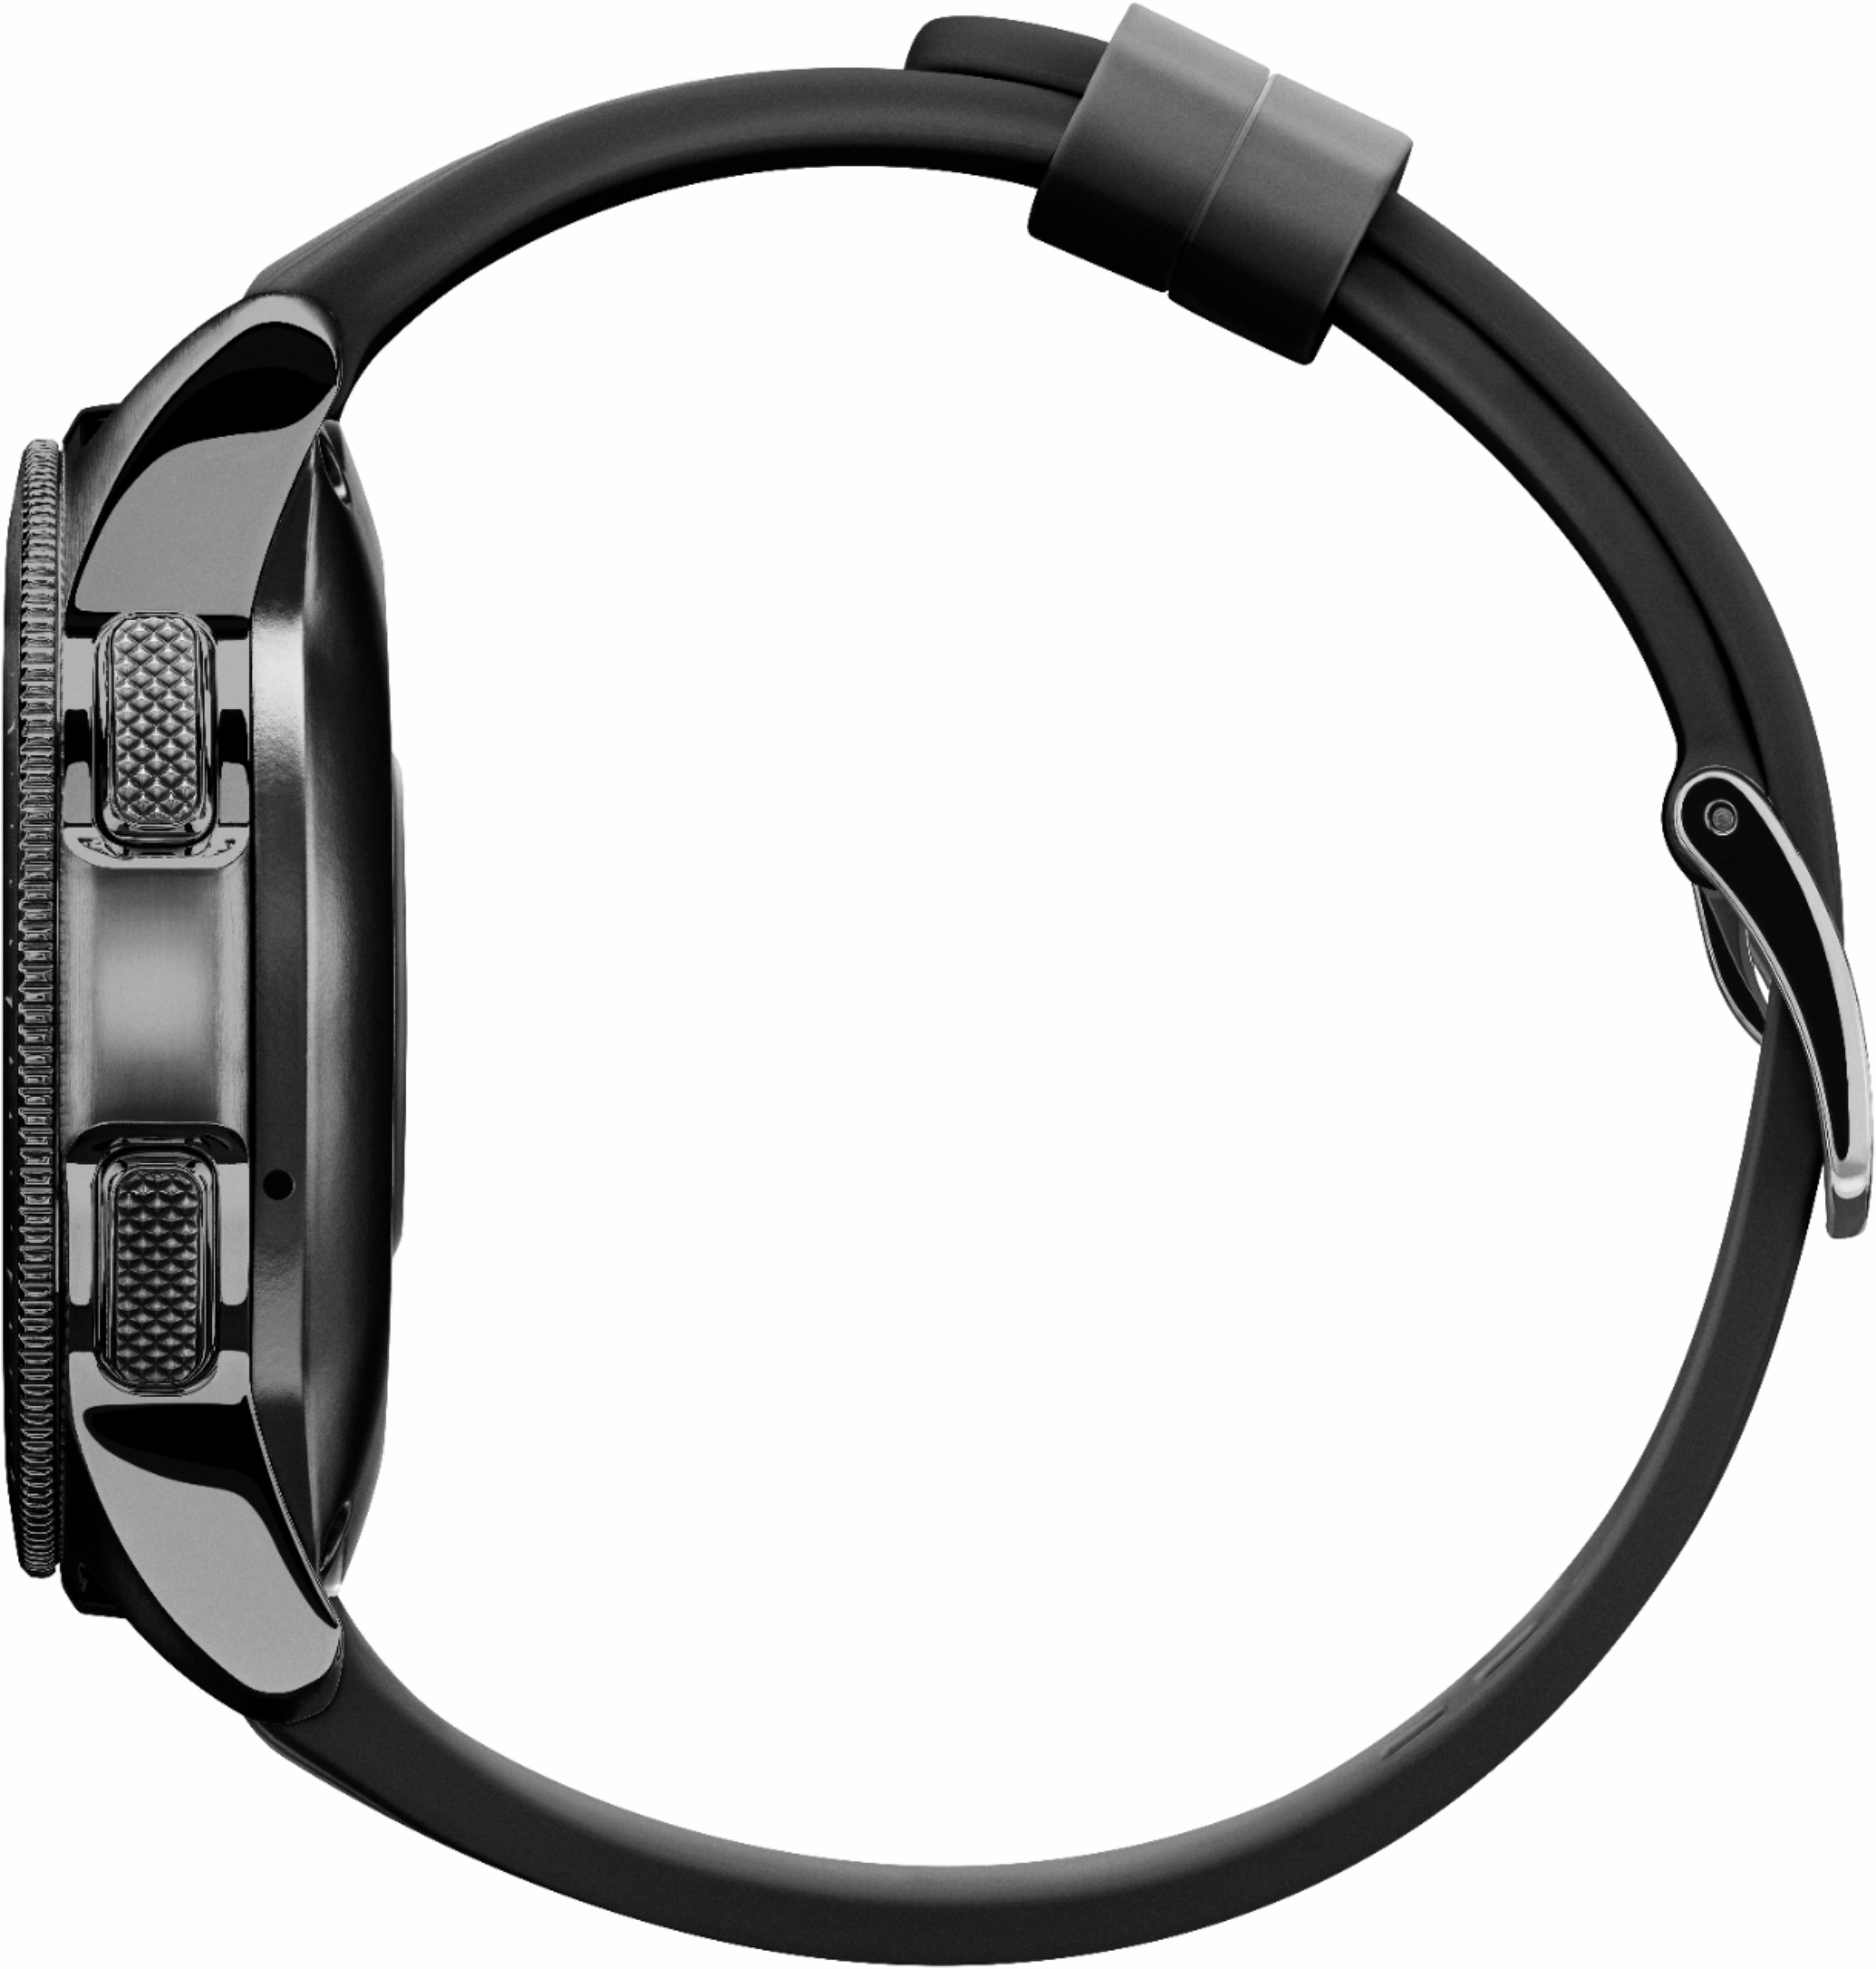 Buy WatchOut Wearables Luxury Stainless Steel Black Metal Clasp Buckle Watch  Chain Strap Band. Compatible with all 22mm Regular Watches and Smart Watches  like Samsung Galaxy Watch 46mm/Gear S3 Frontier/S3 Classic/Huawei Watch